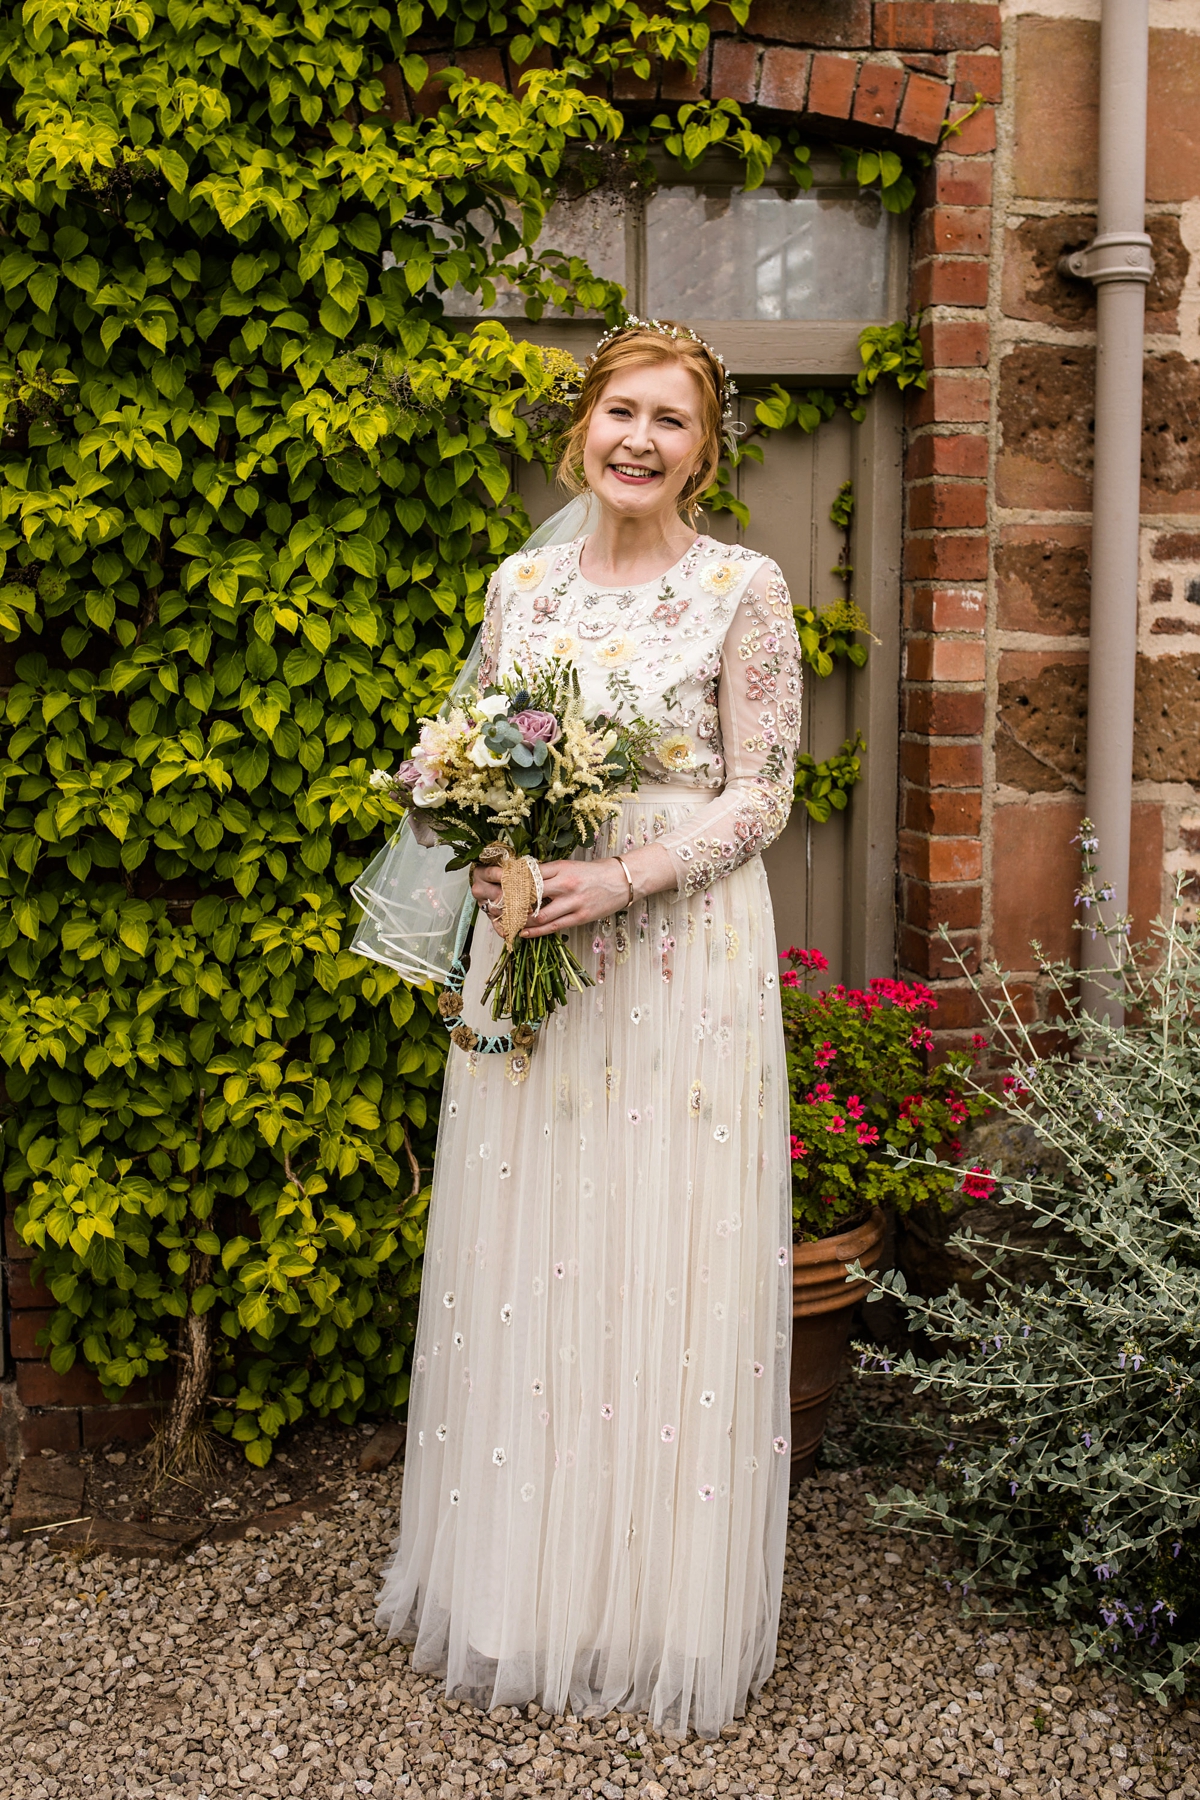 56 Mother-of-the-Bride Dresses That Wowed at Weddings